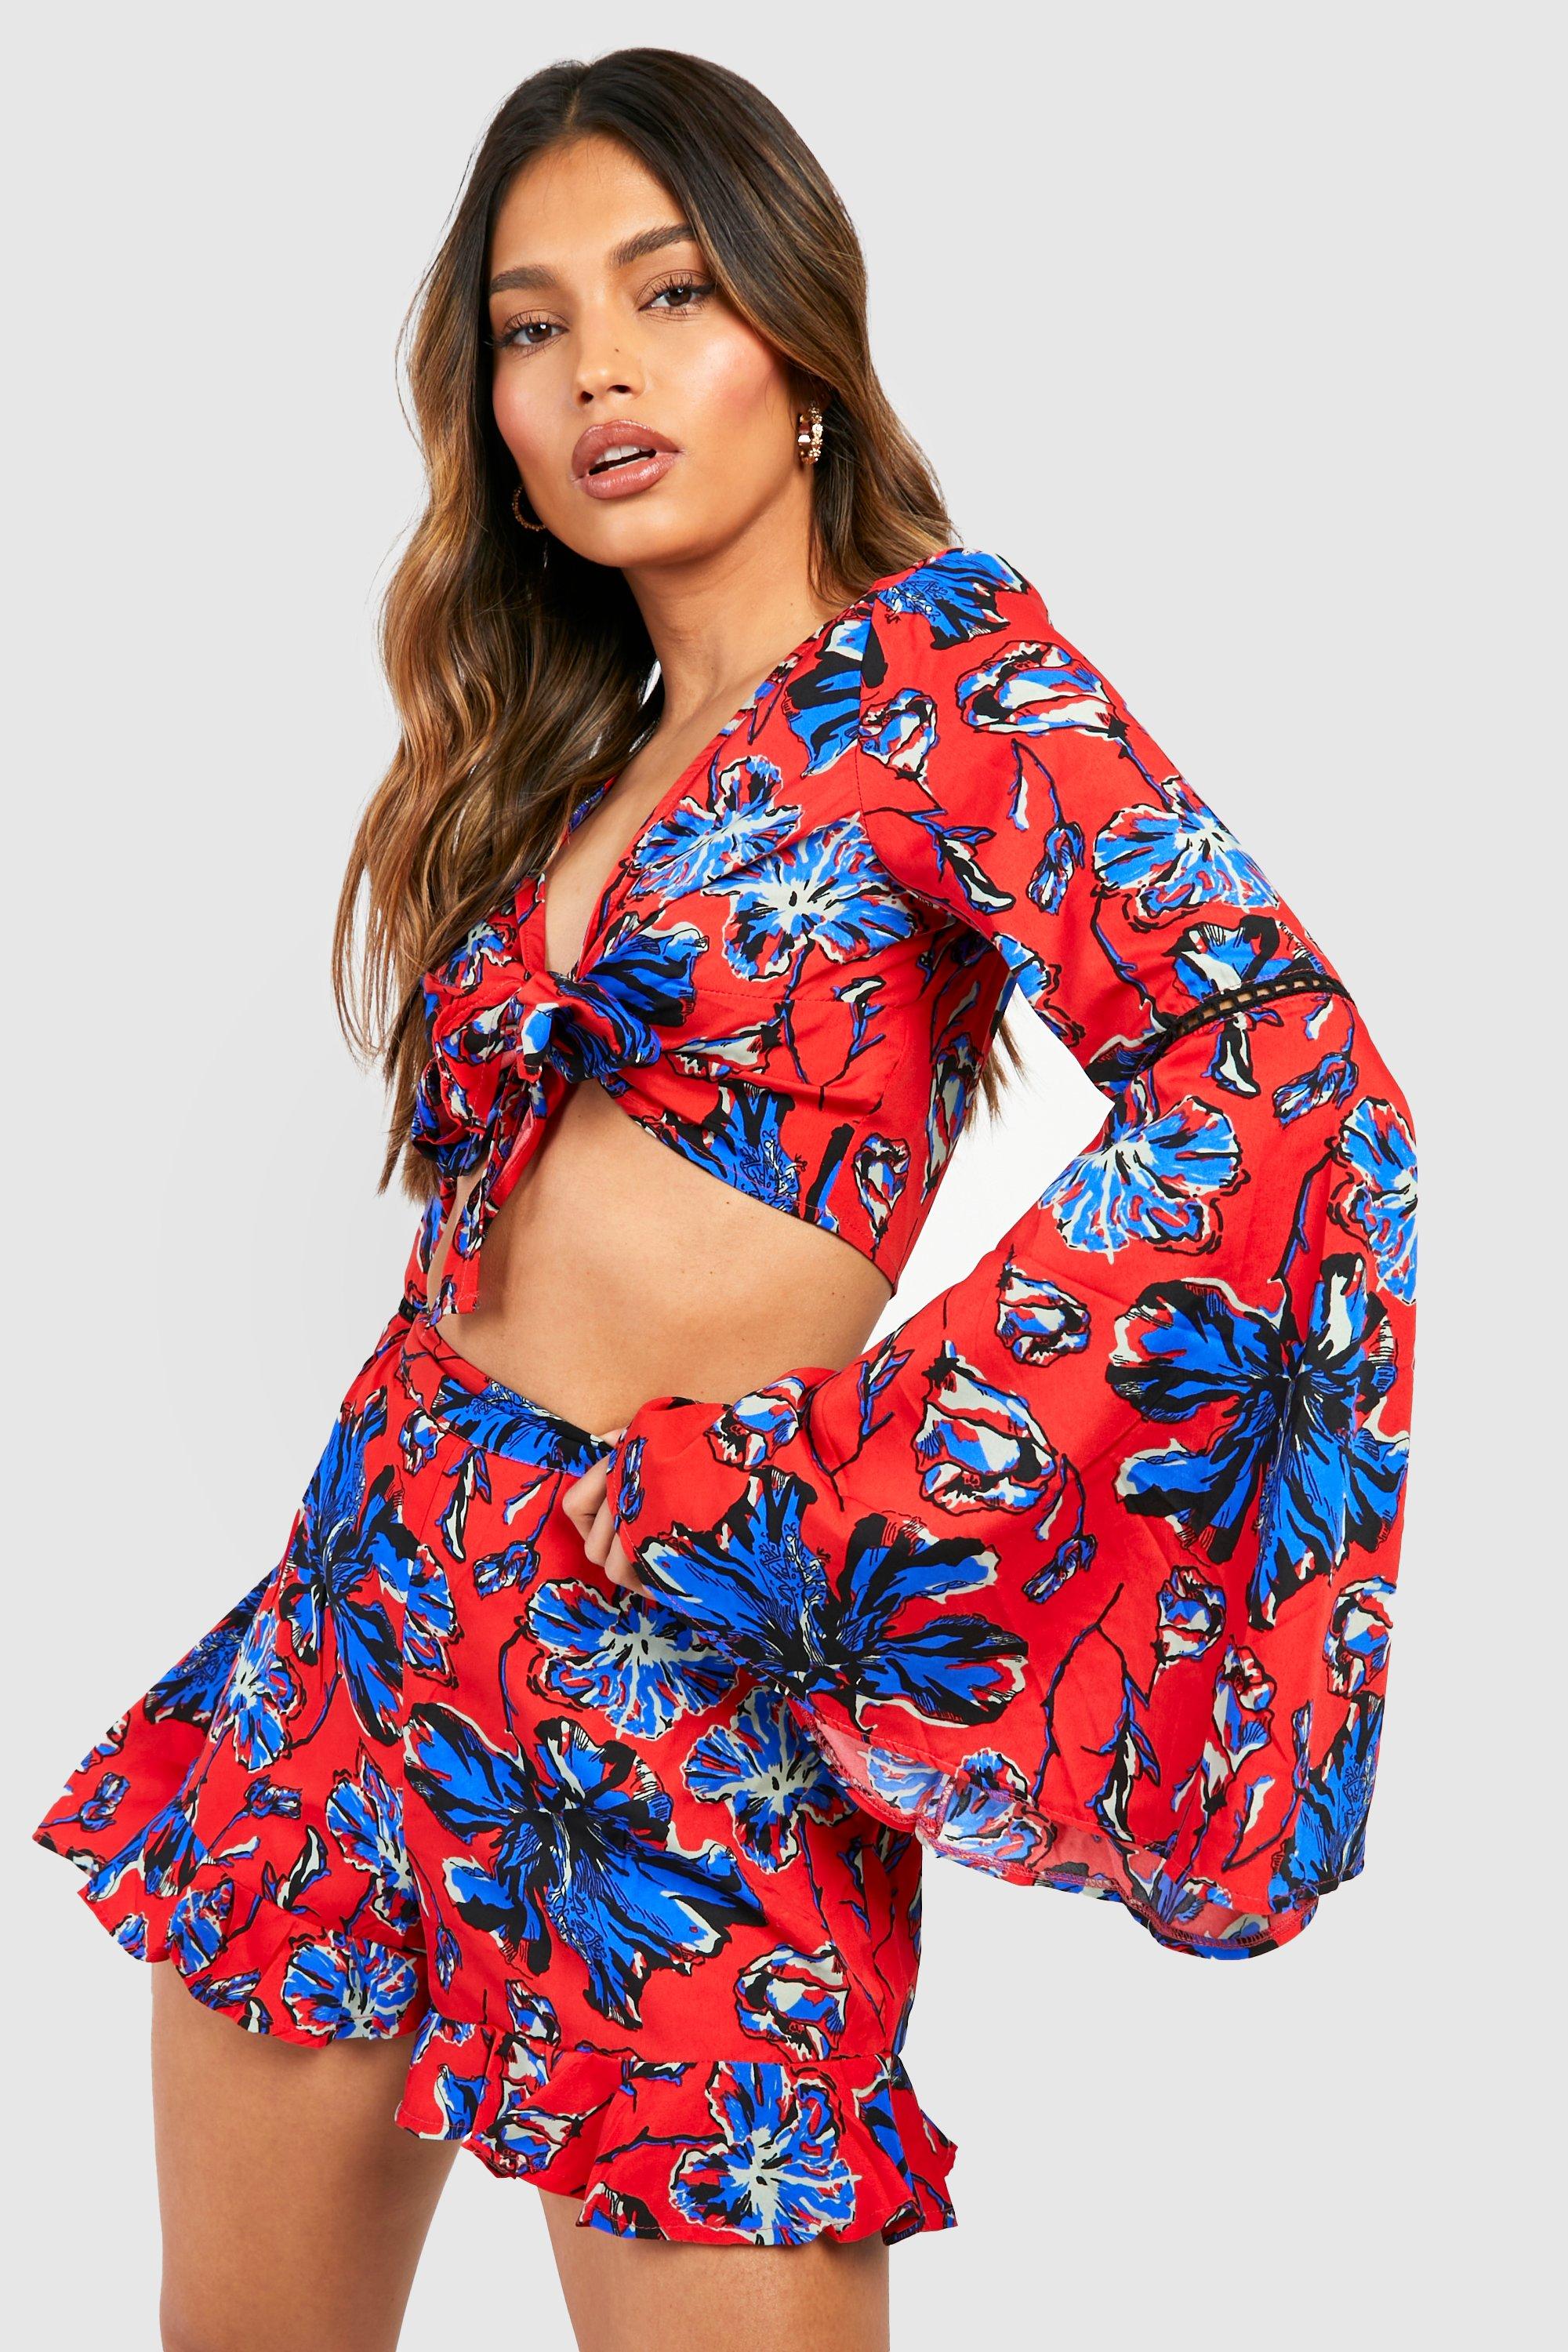 Vintage Shorts, Retro Shorts, High Waisted Shorts Womens Floral Knot Front Short Two-Piece Set - Red - 12 $19.80 AT vintagedancer.com